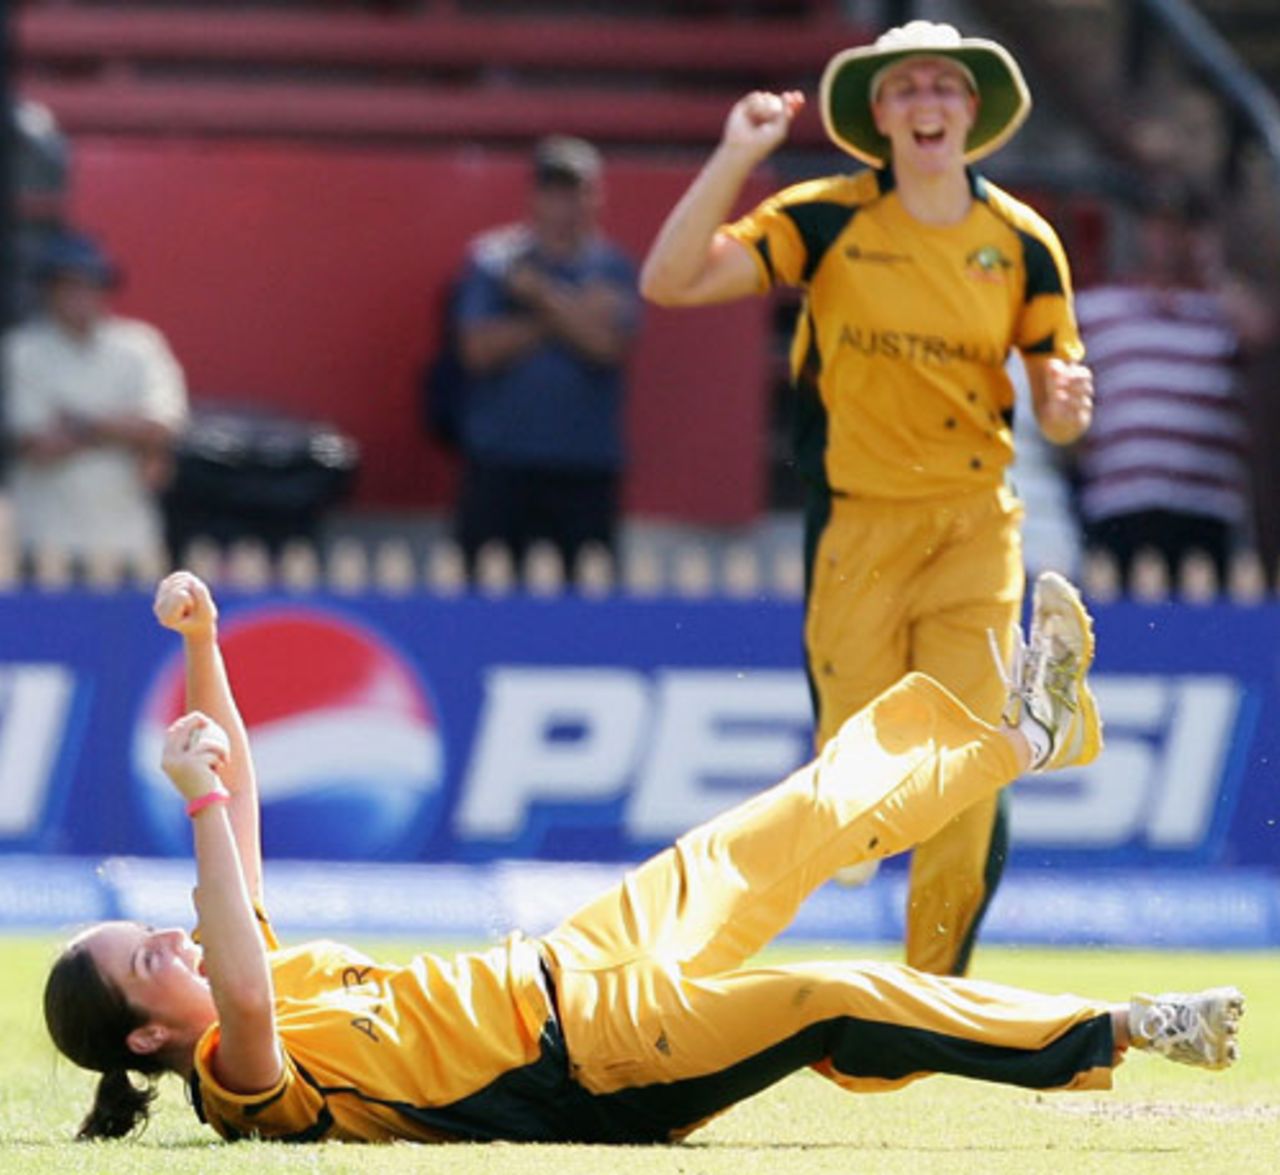 Rene Farrell is all smiles after completing a catch, Australia v England, women's World Cup, Super Six, North Sydney Oval, March 19, 2009